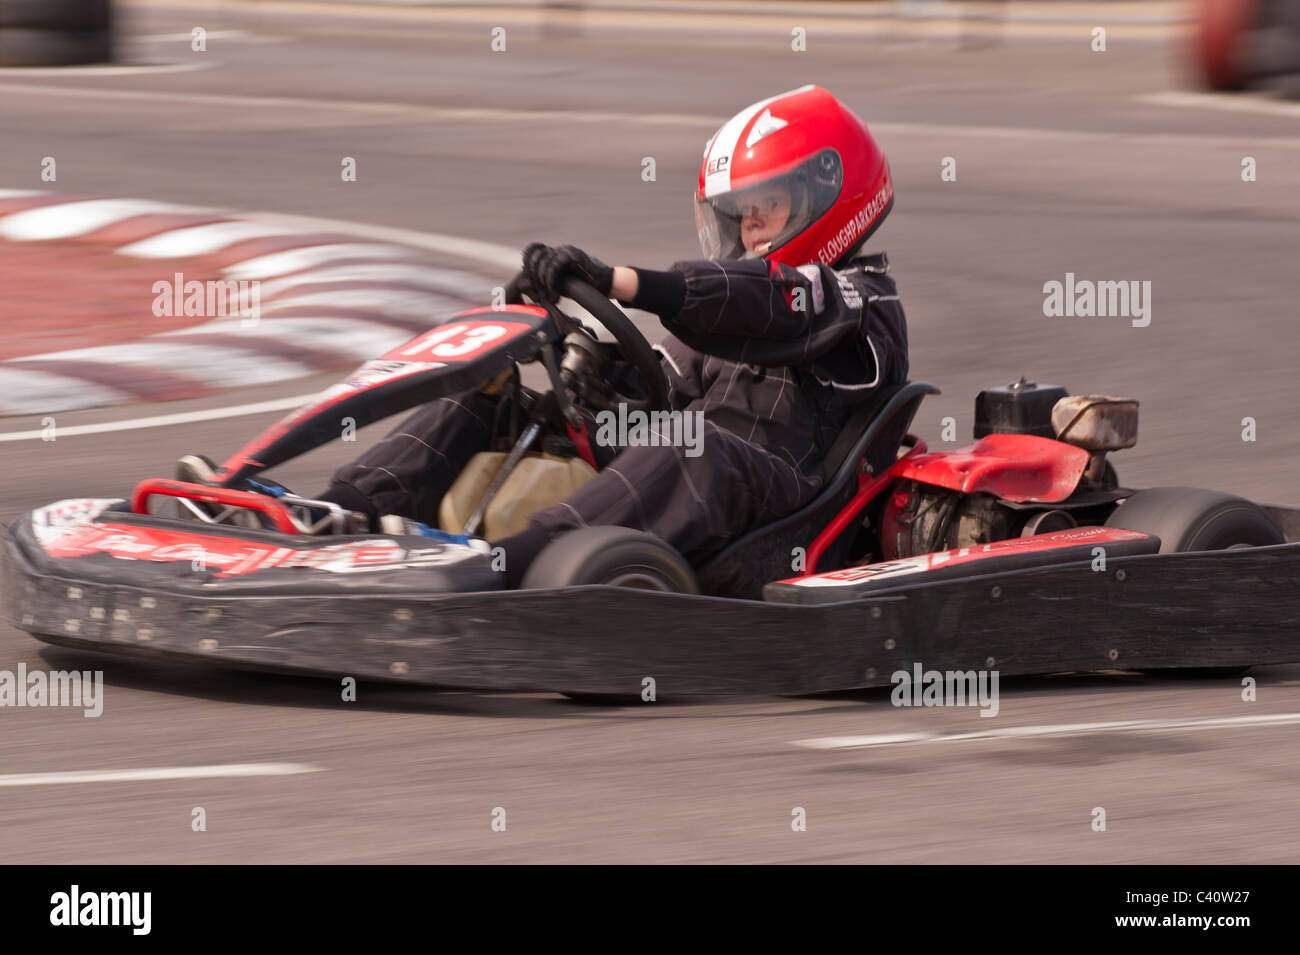 A petrol powered Go cart showing deliberate motion blur on a race track in the Uk Stock Photo